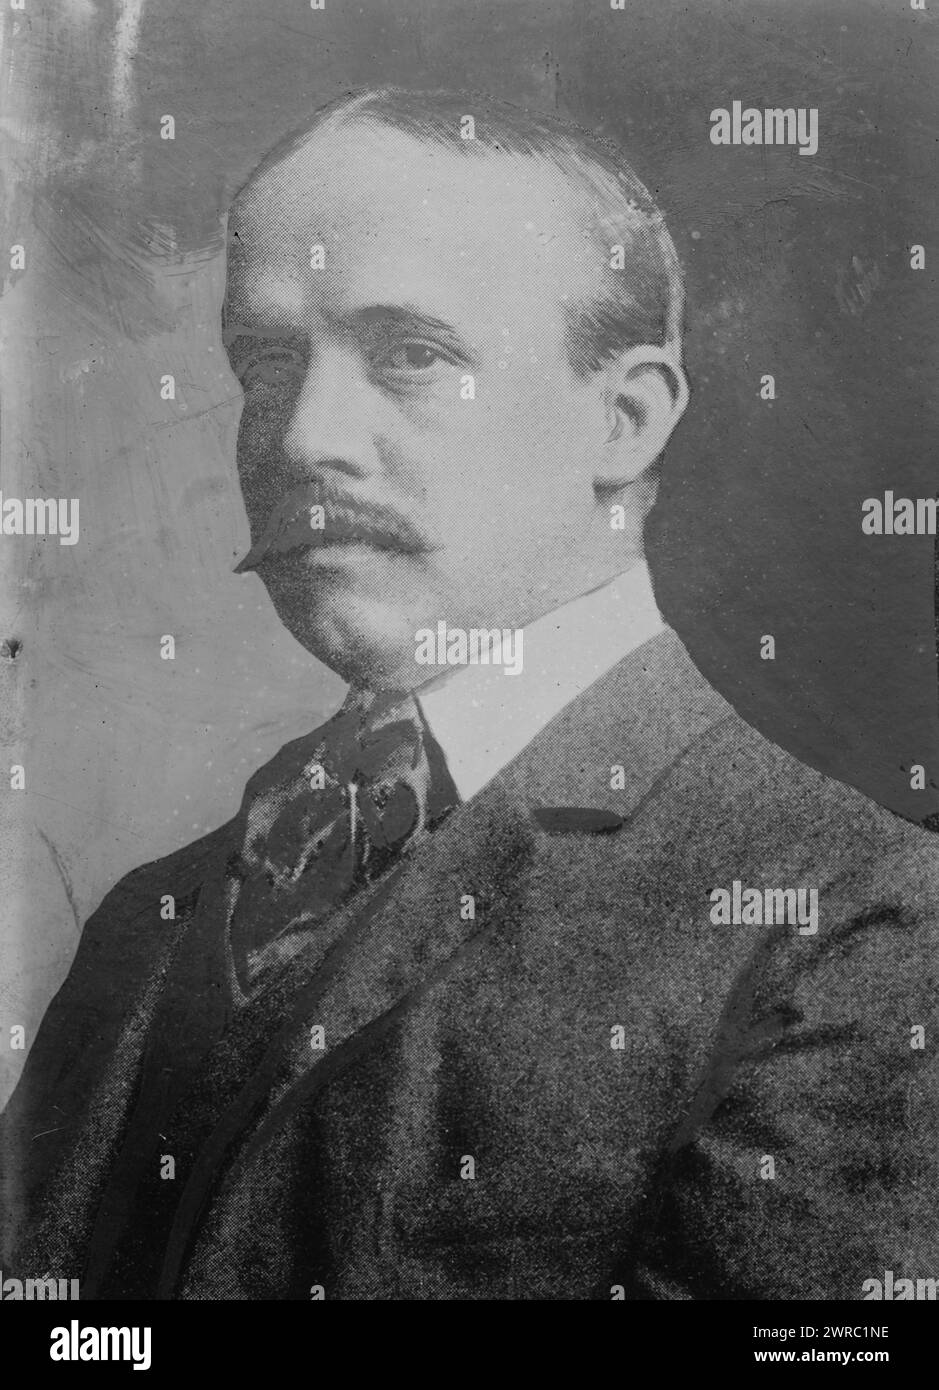 Olney Arnold, Photograph shows Democratic politician Olney Arnold (1861-1916) of Providence, Rhode Island, who served as the U.S. Conul General in Cairo, Egypt., between ca. 1915 and ca. 1920, Glass negatives, 1 negative: glass Stock Photo